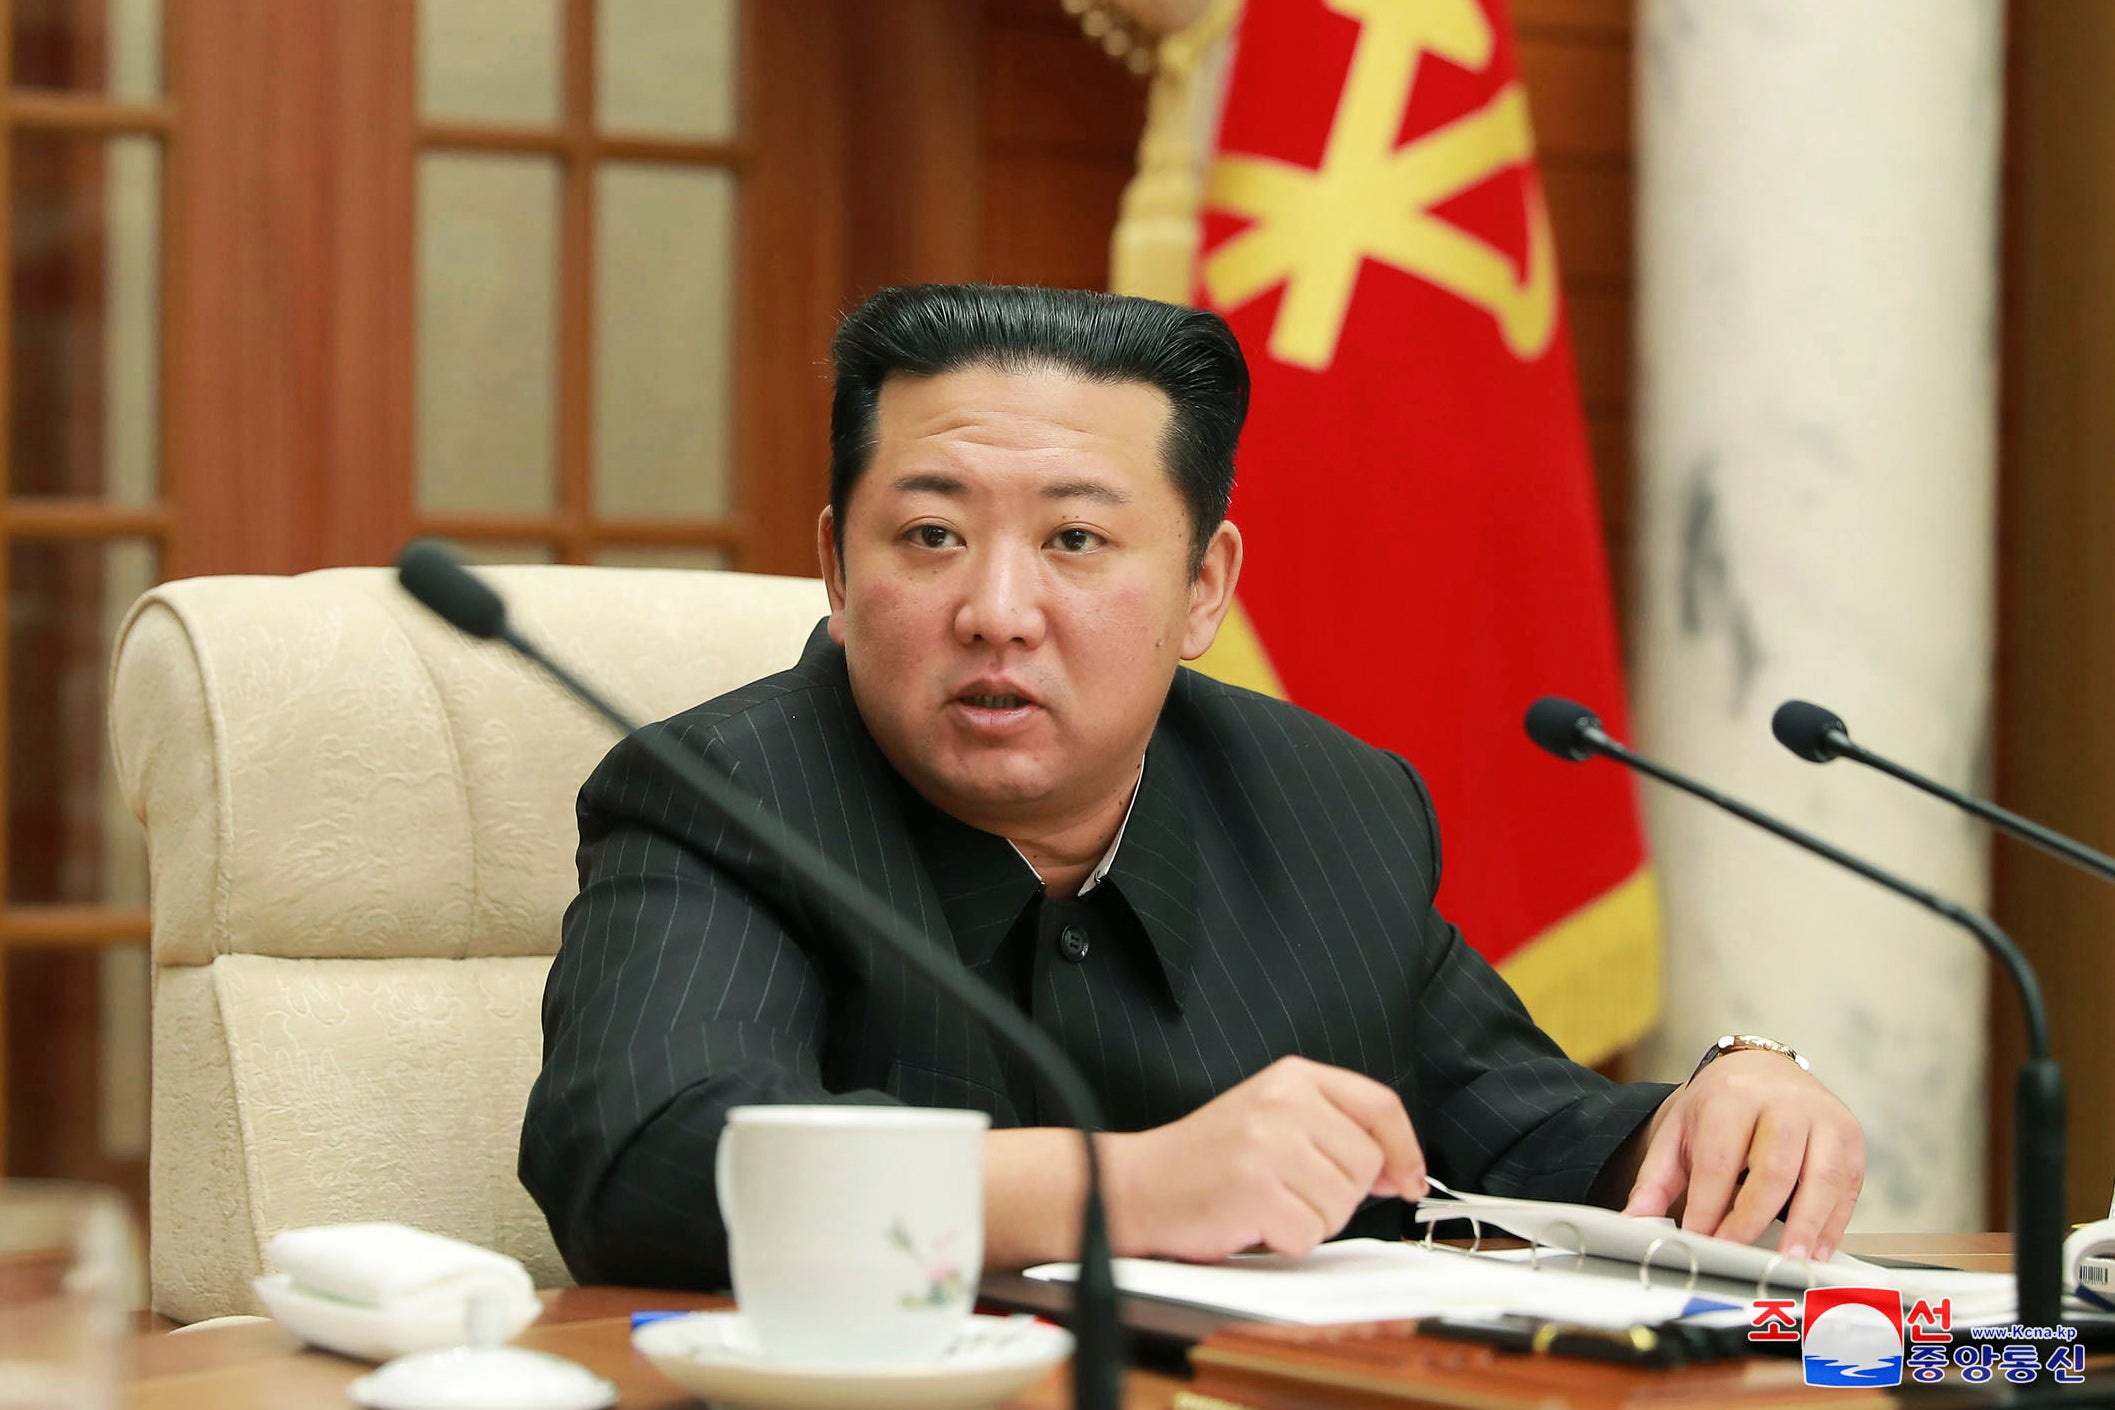 In this photo provided by the North Korean government, leader Kim Jong Un attends a meeting of the Central Committee of the ruling Workers’ Party in Pyongyang on 19 January